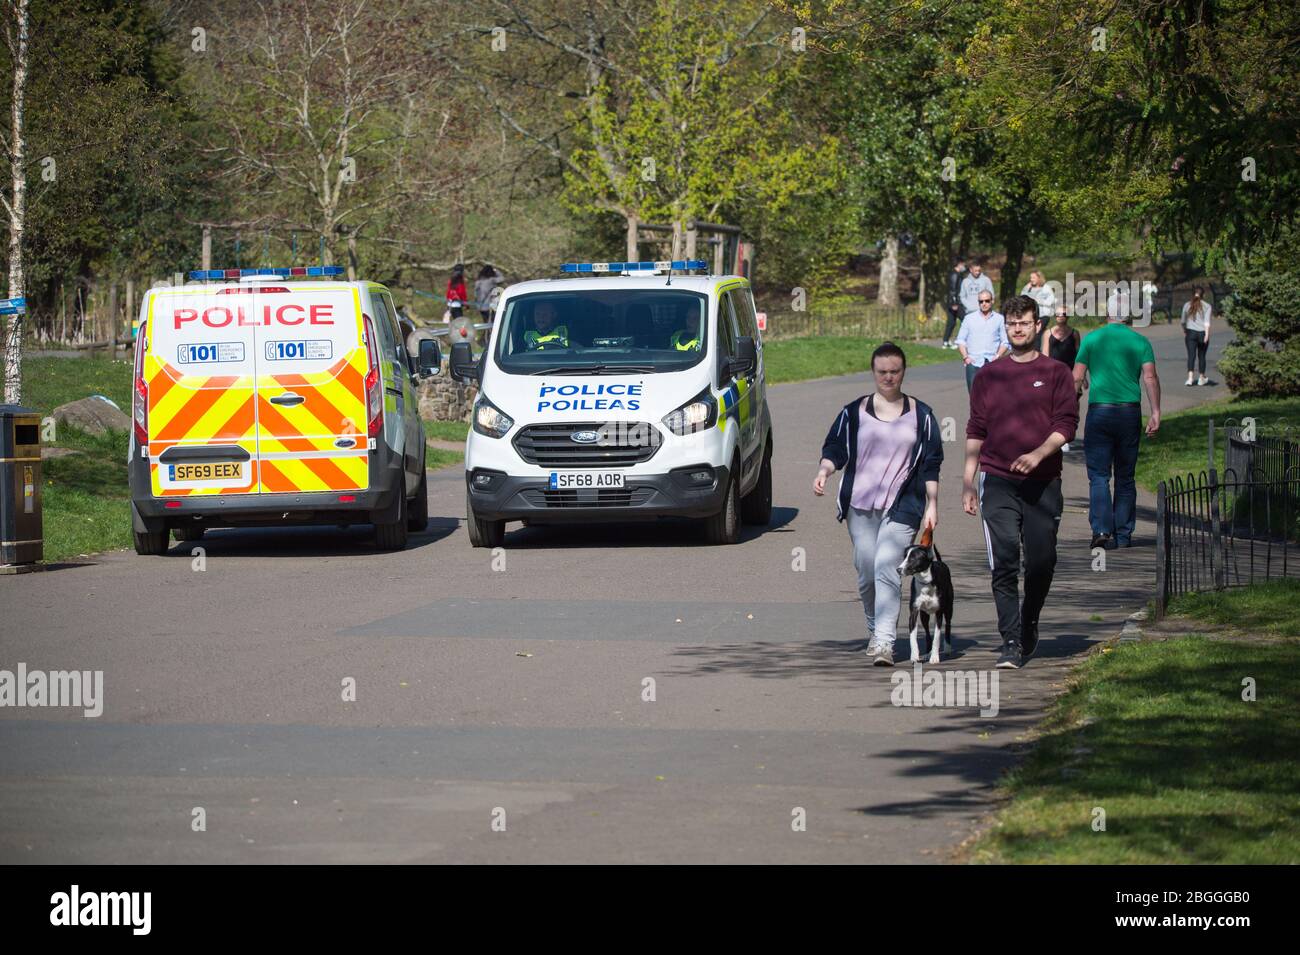 Glasgow, UK. 21st Apr, 2020. Pictured: A high police presence in the park to ensure that everyone is social distancing and taking not more than their allotted one hour of daily exercise. Scenes from Kelvingrove Park in Glasgow during the coronavirus (COVID-19) lockdown. Credit: Colin Fisher/Alamy Live News Stock Photo